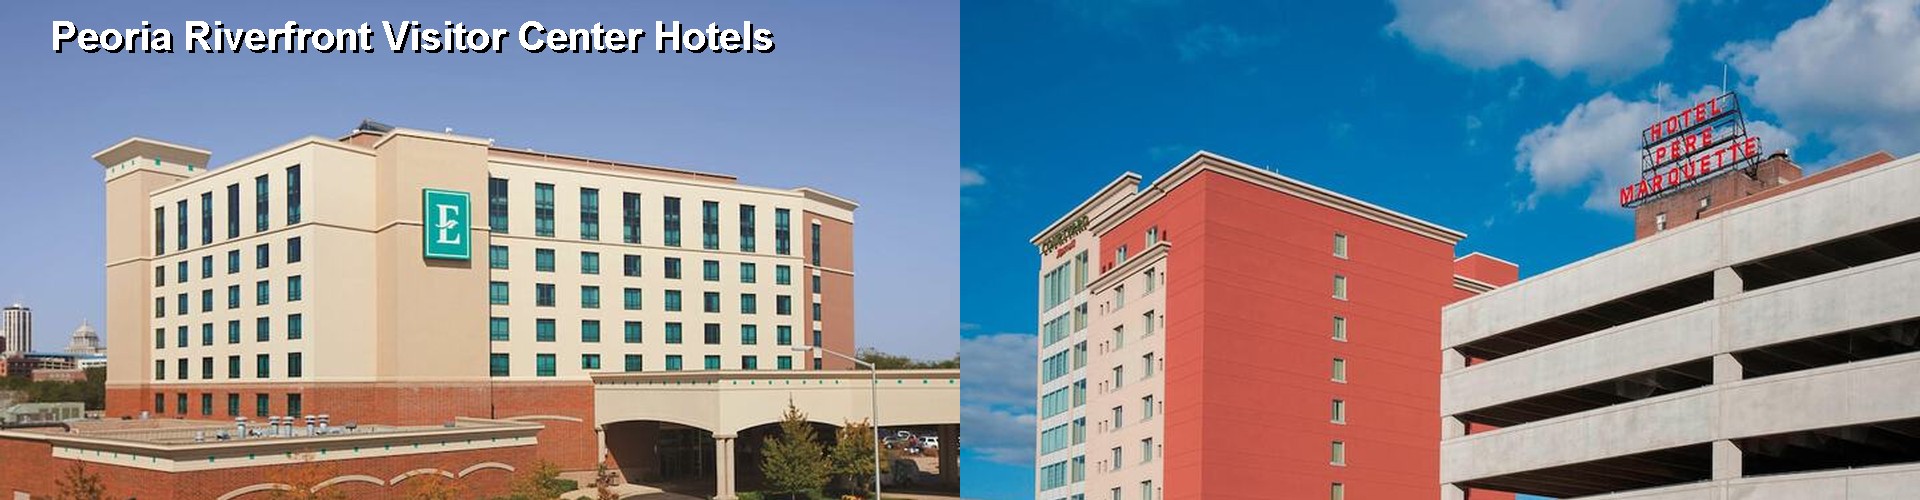 5 Best Hotels near Peoria Riverfront Visitor Center